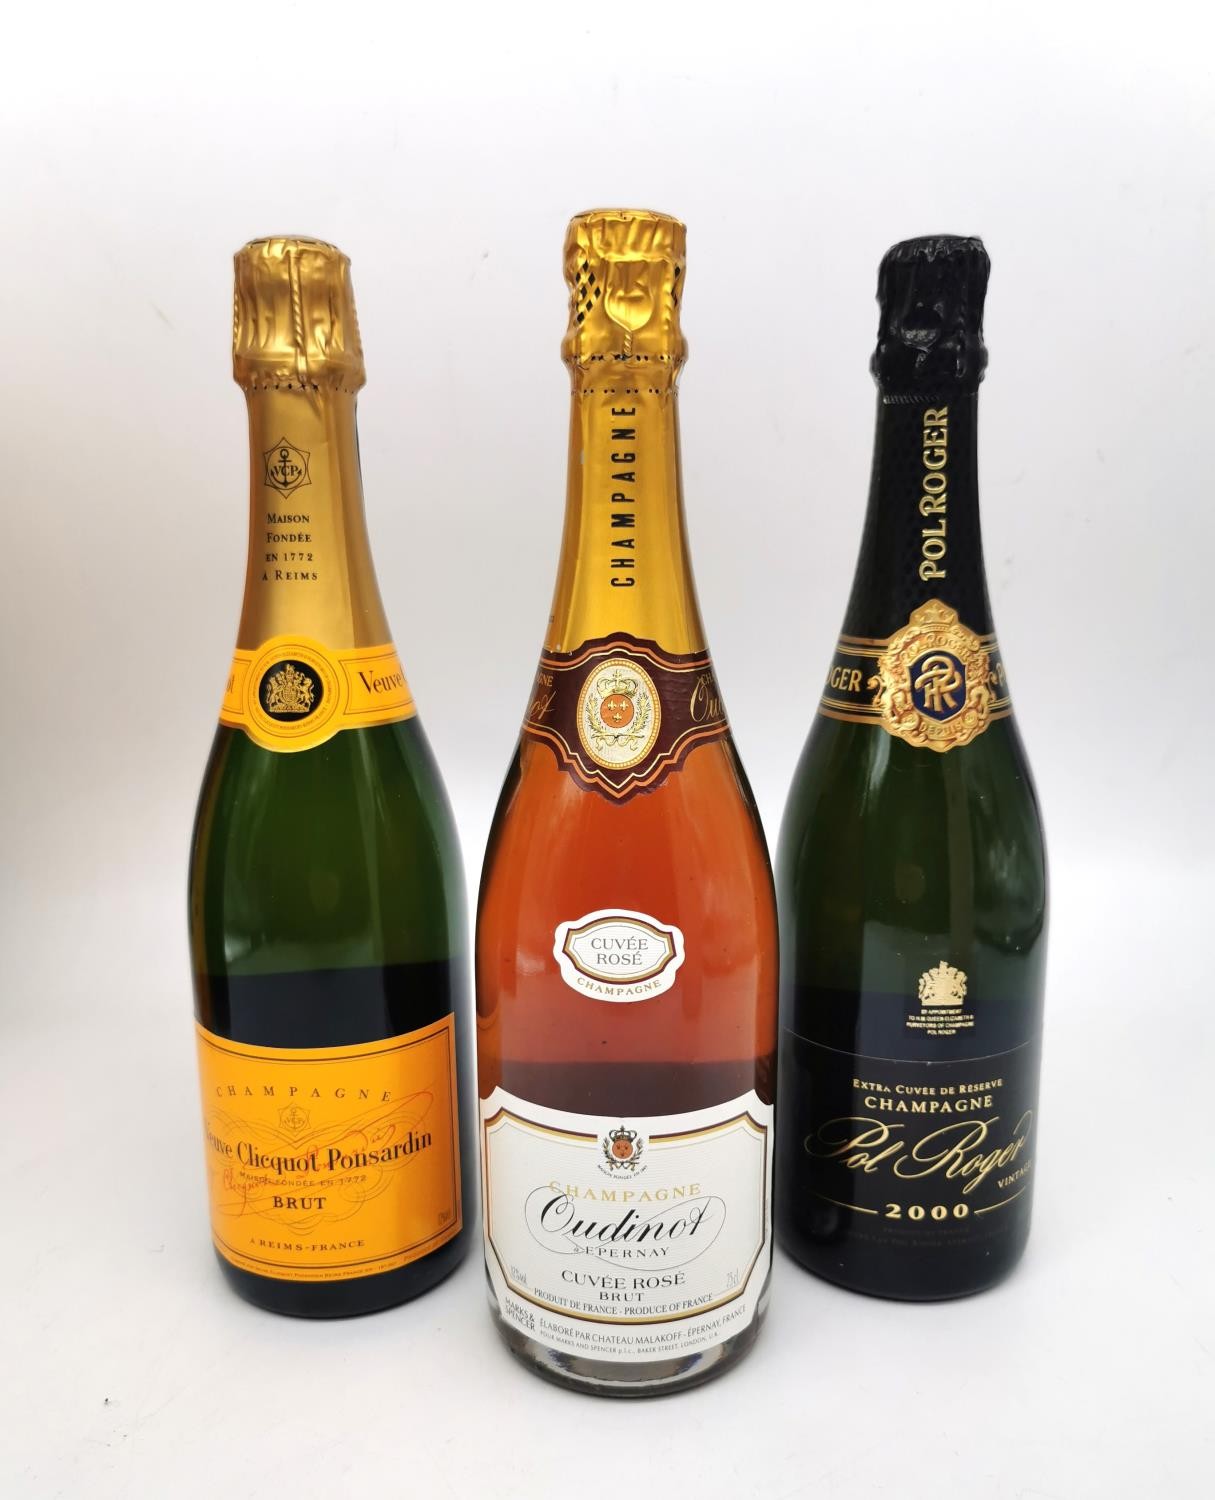 Three boxed bottles of Champagne Pol Roger 2000, Veuve Clicquot Ponsardin Brut and Oudinot Rose